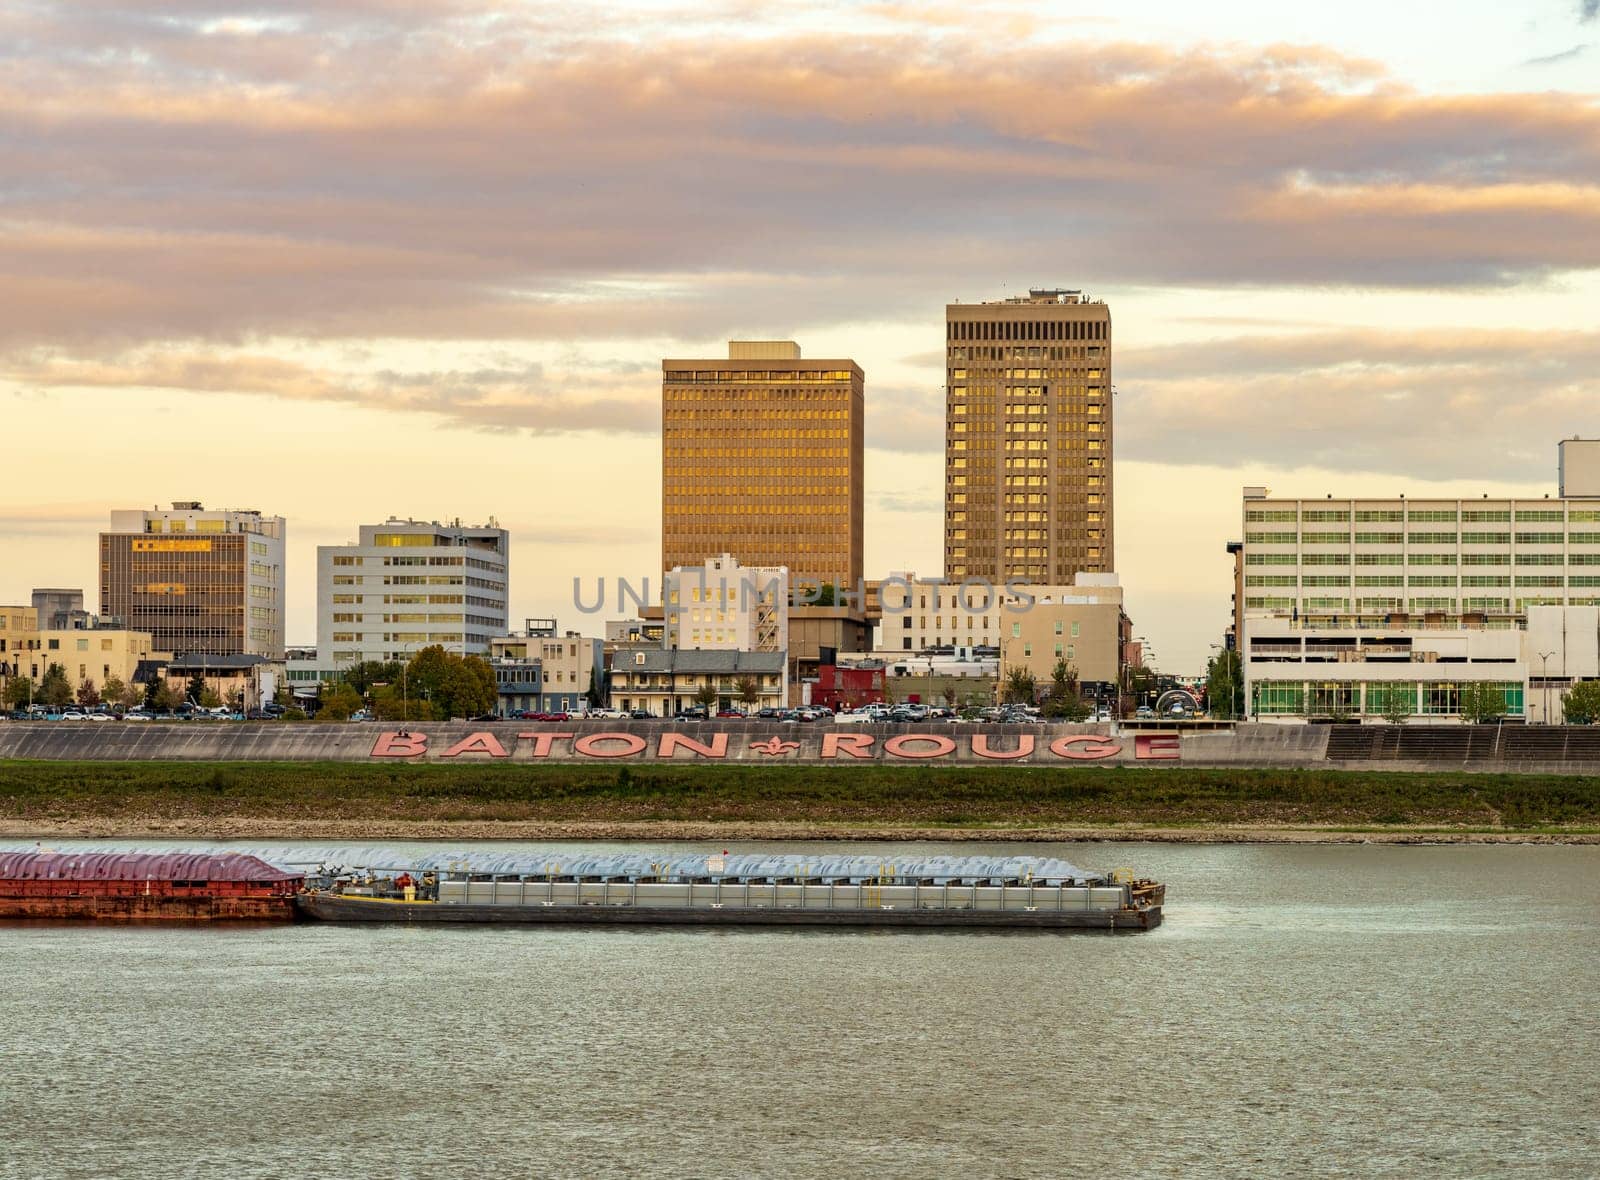 Skyline of Baton Rouge at sunset over river barges by steheap